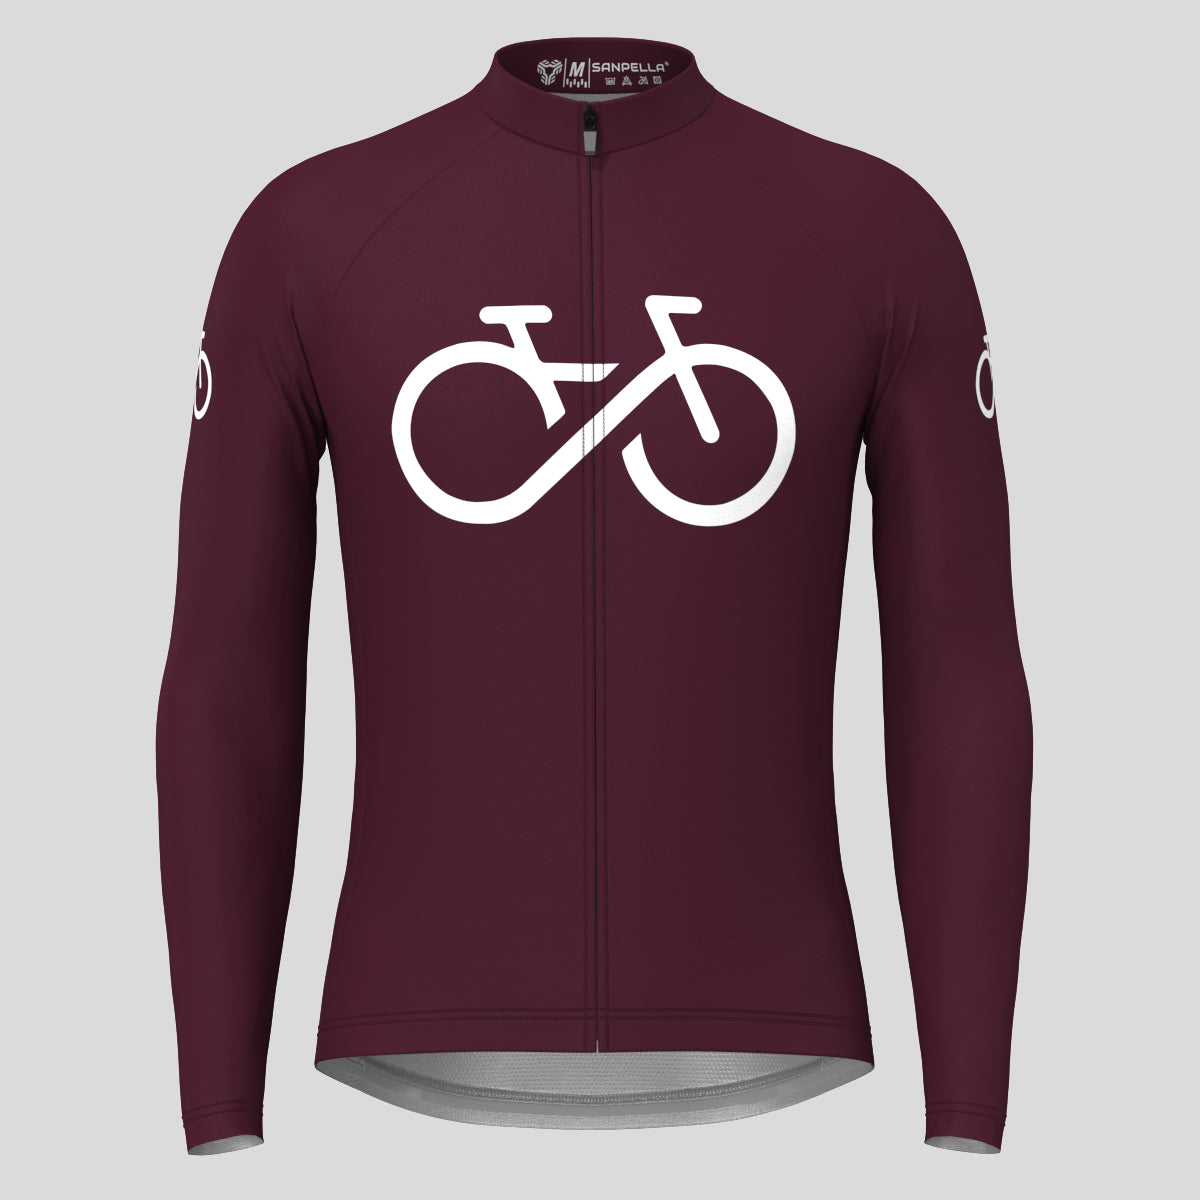 Bike Forever Men's LS Cycling Jersey - Burgundy